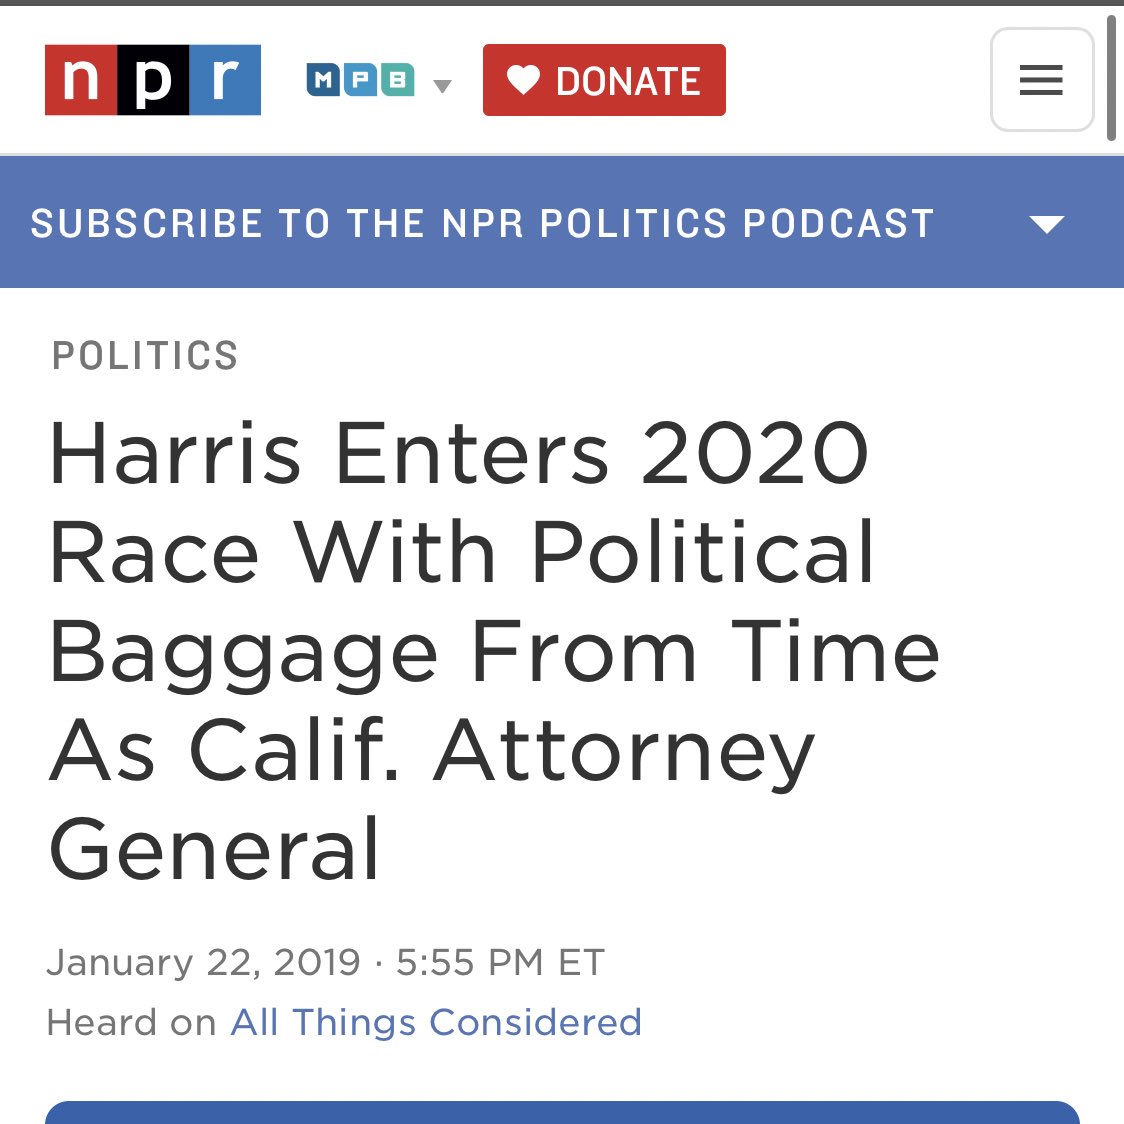 That isn't Kamala Harris' first "baggage" headline. She netted some in 2019, when she was still a presidential candidate. 4/